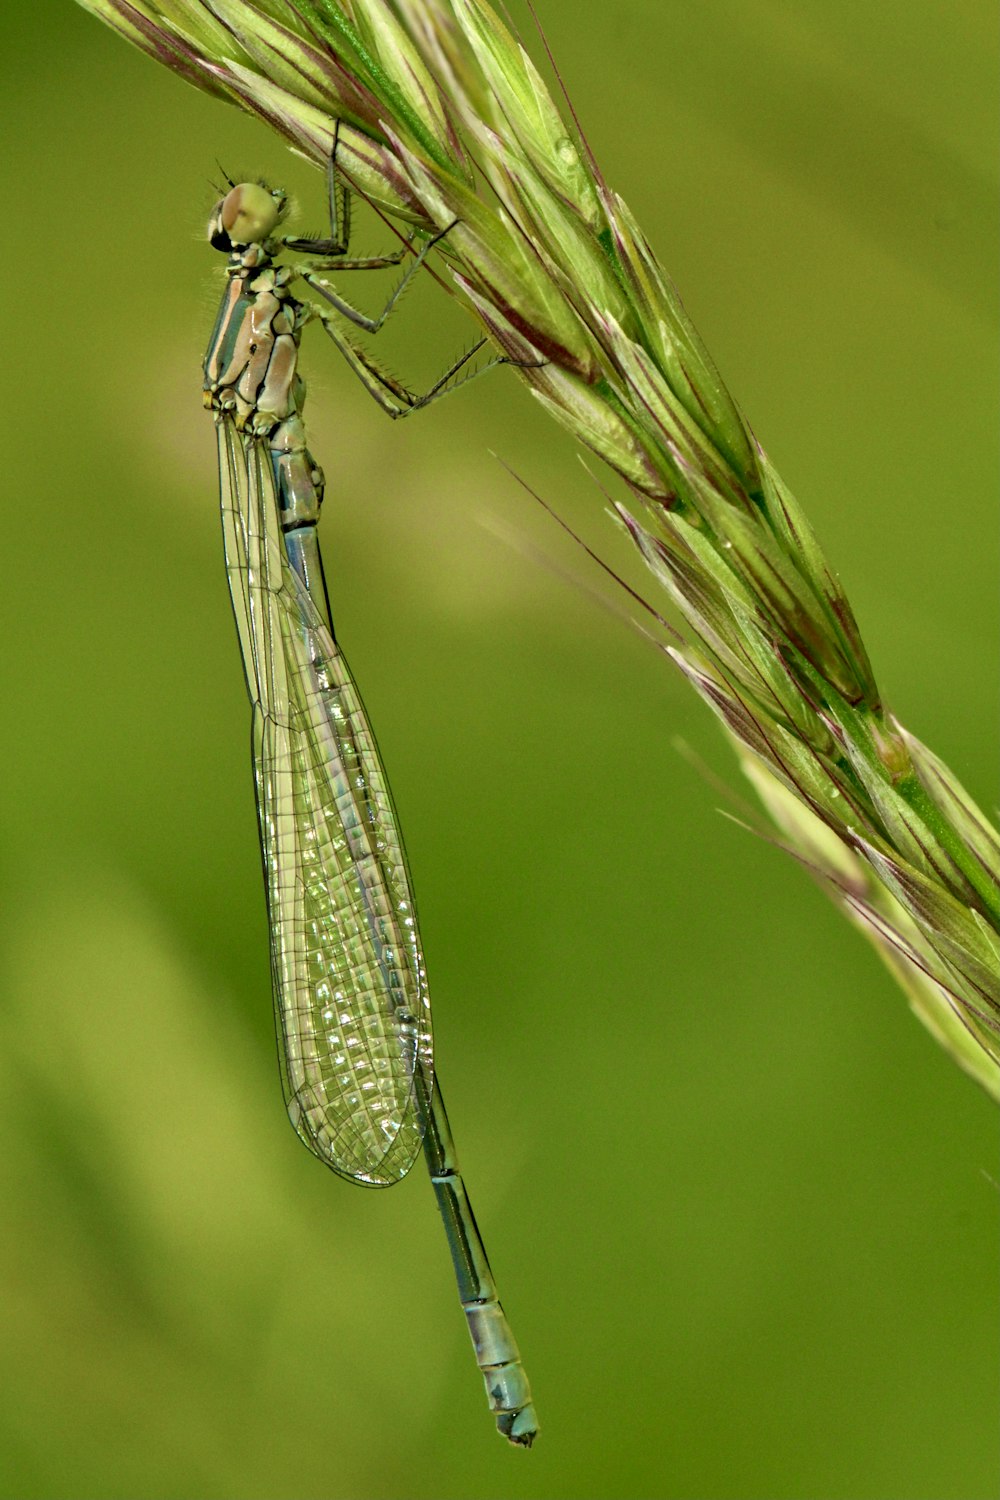 black damselfly perched on green grass in close up photography during daytime